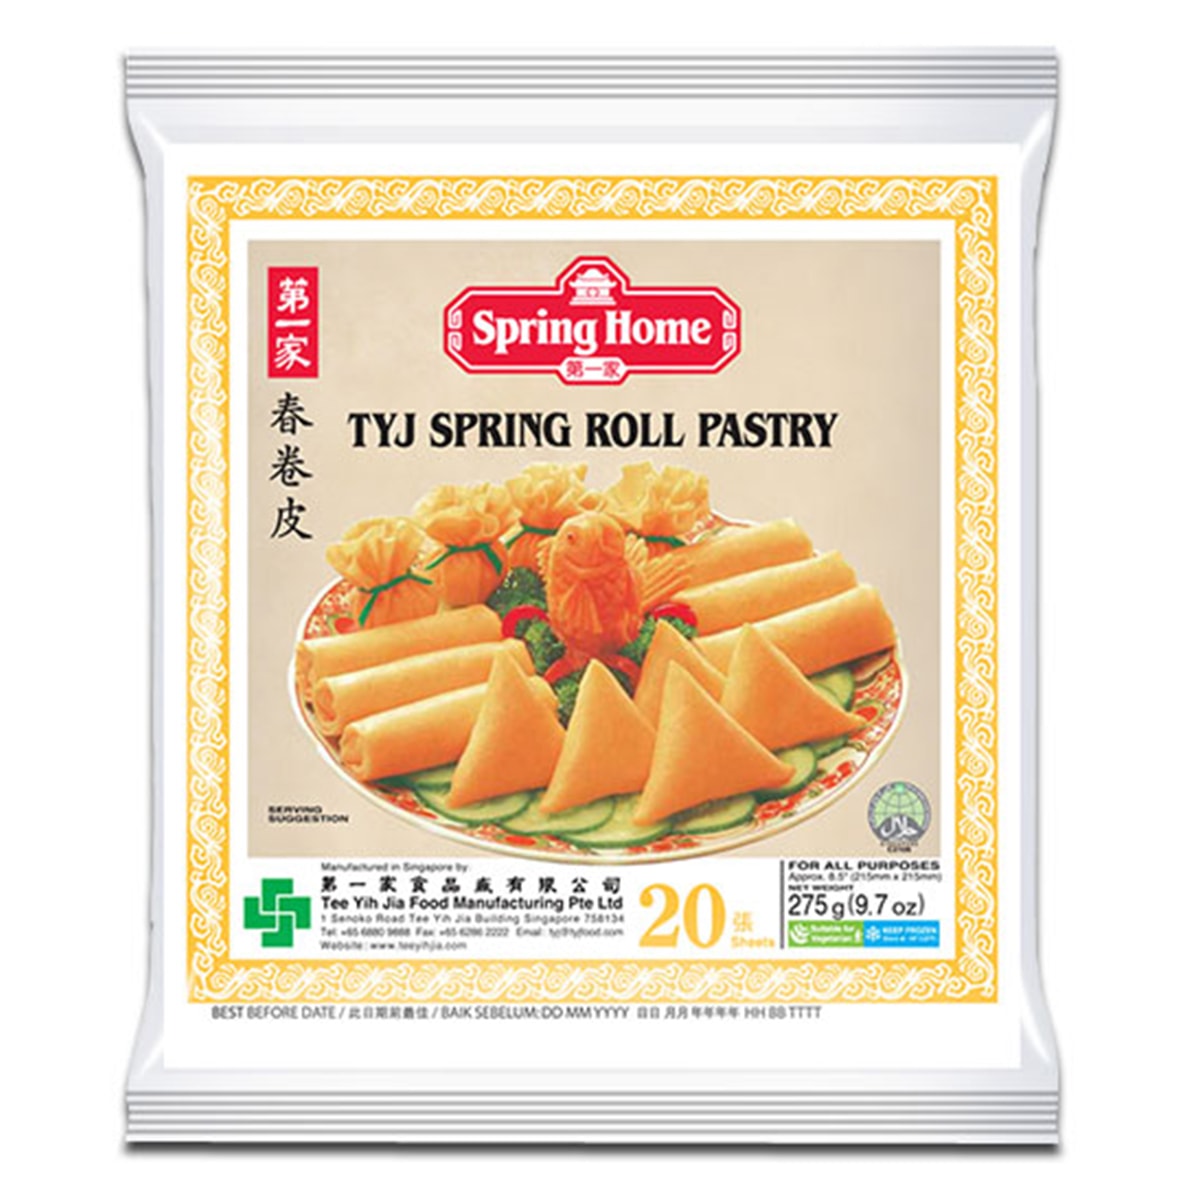 Buy Spring Home Frozen Tyg Spring Roll Pastry 20 Sheets [8.5 Inch (215mm) Square] (Plain) - 275 gm